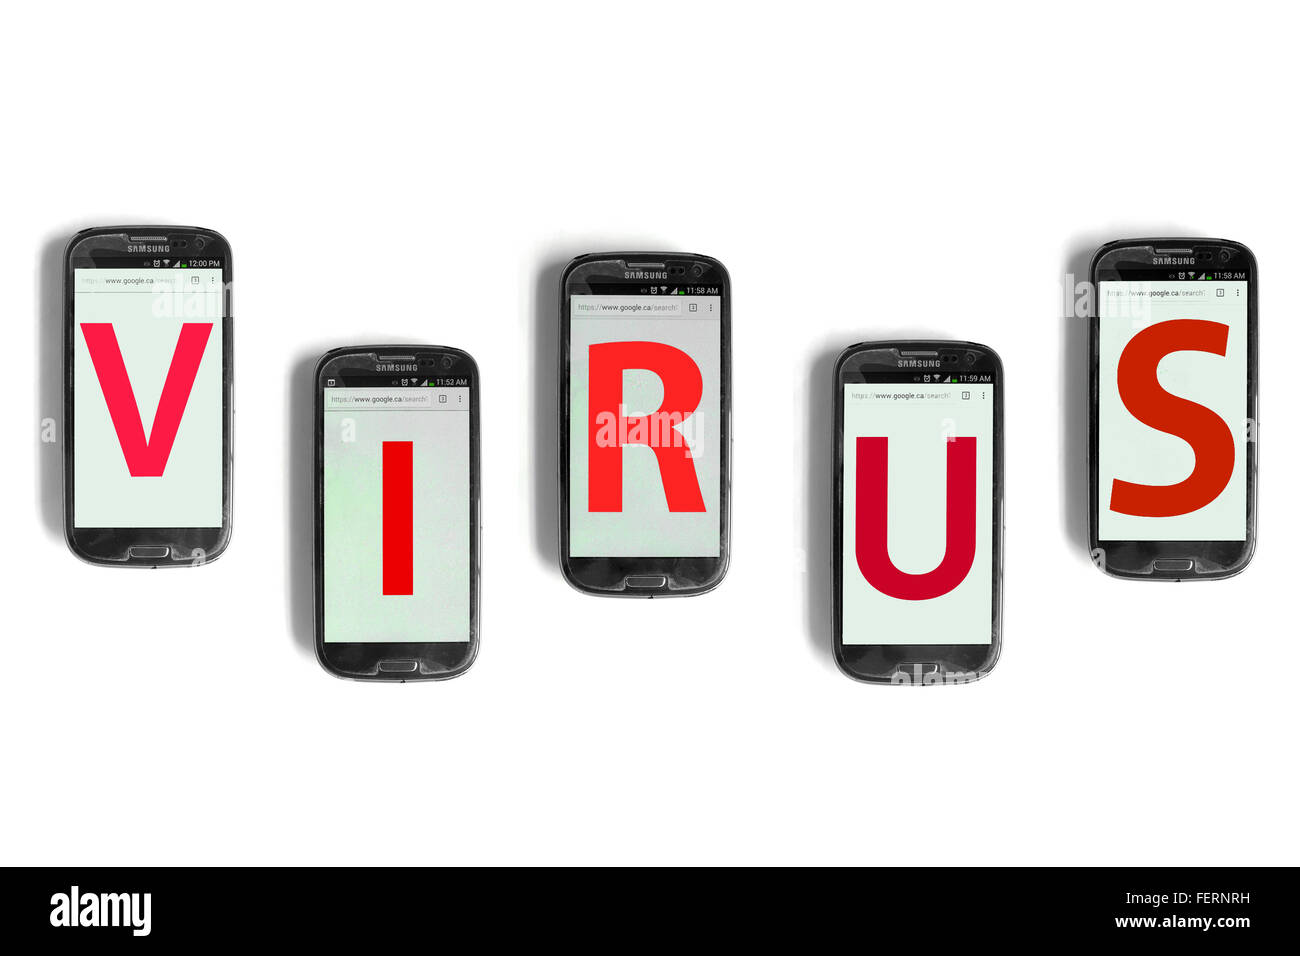 Virus on the screens of smartphones photographed against a white background. Stock Photo